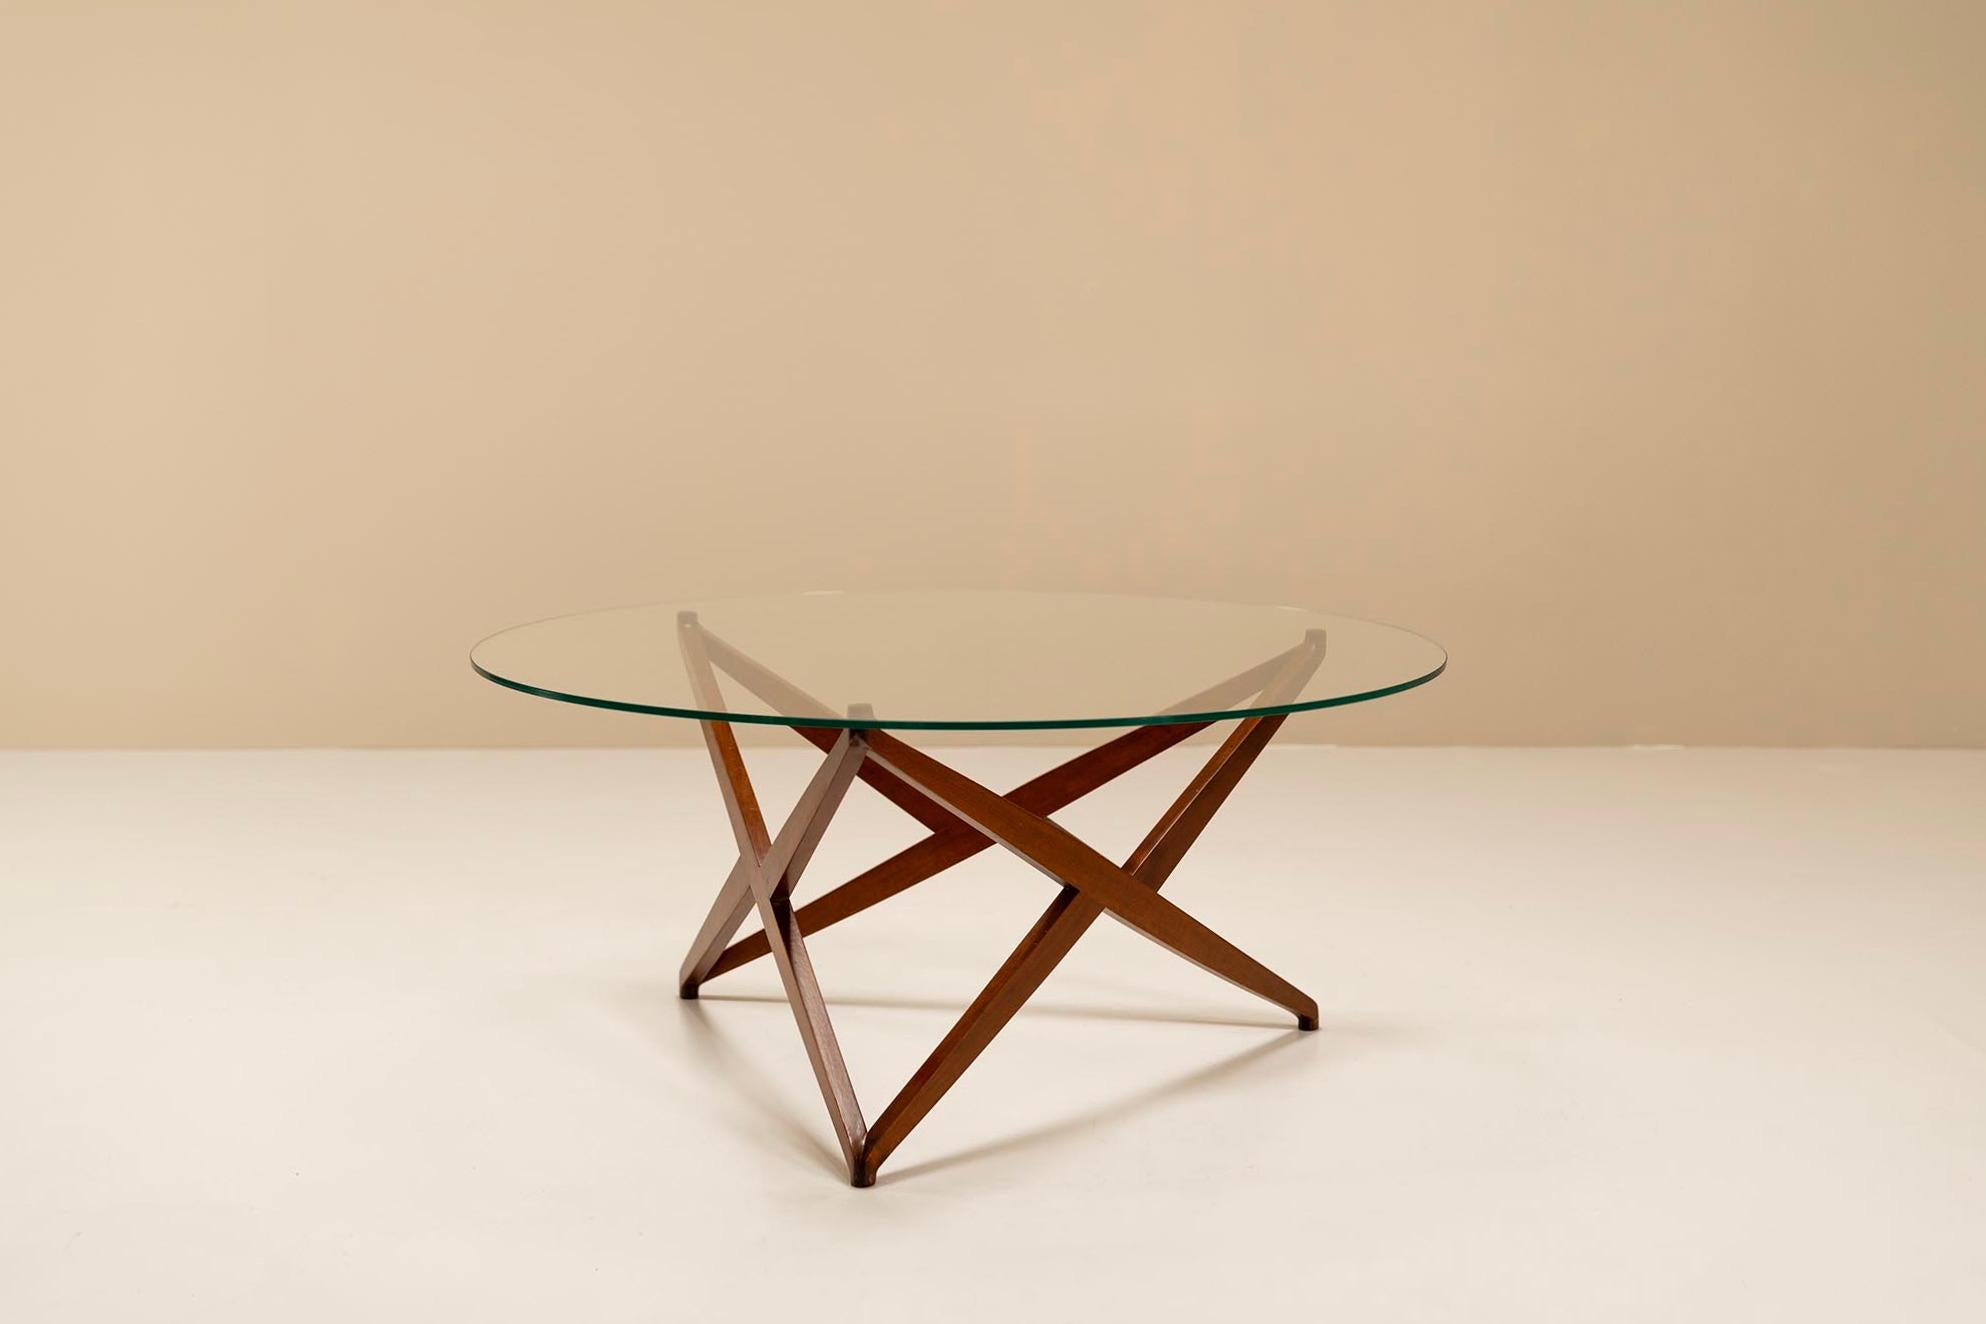 Mid-20th Century Italian Modern Round Coffee Table with Star-shaped Base by Angelo Ostuni, 1960s For Sale